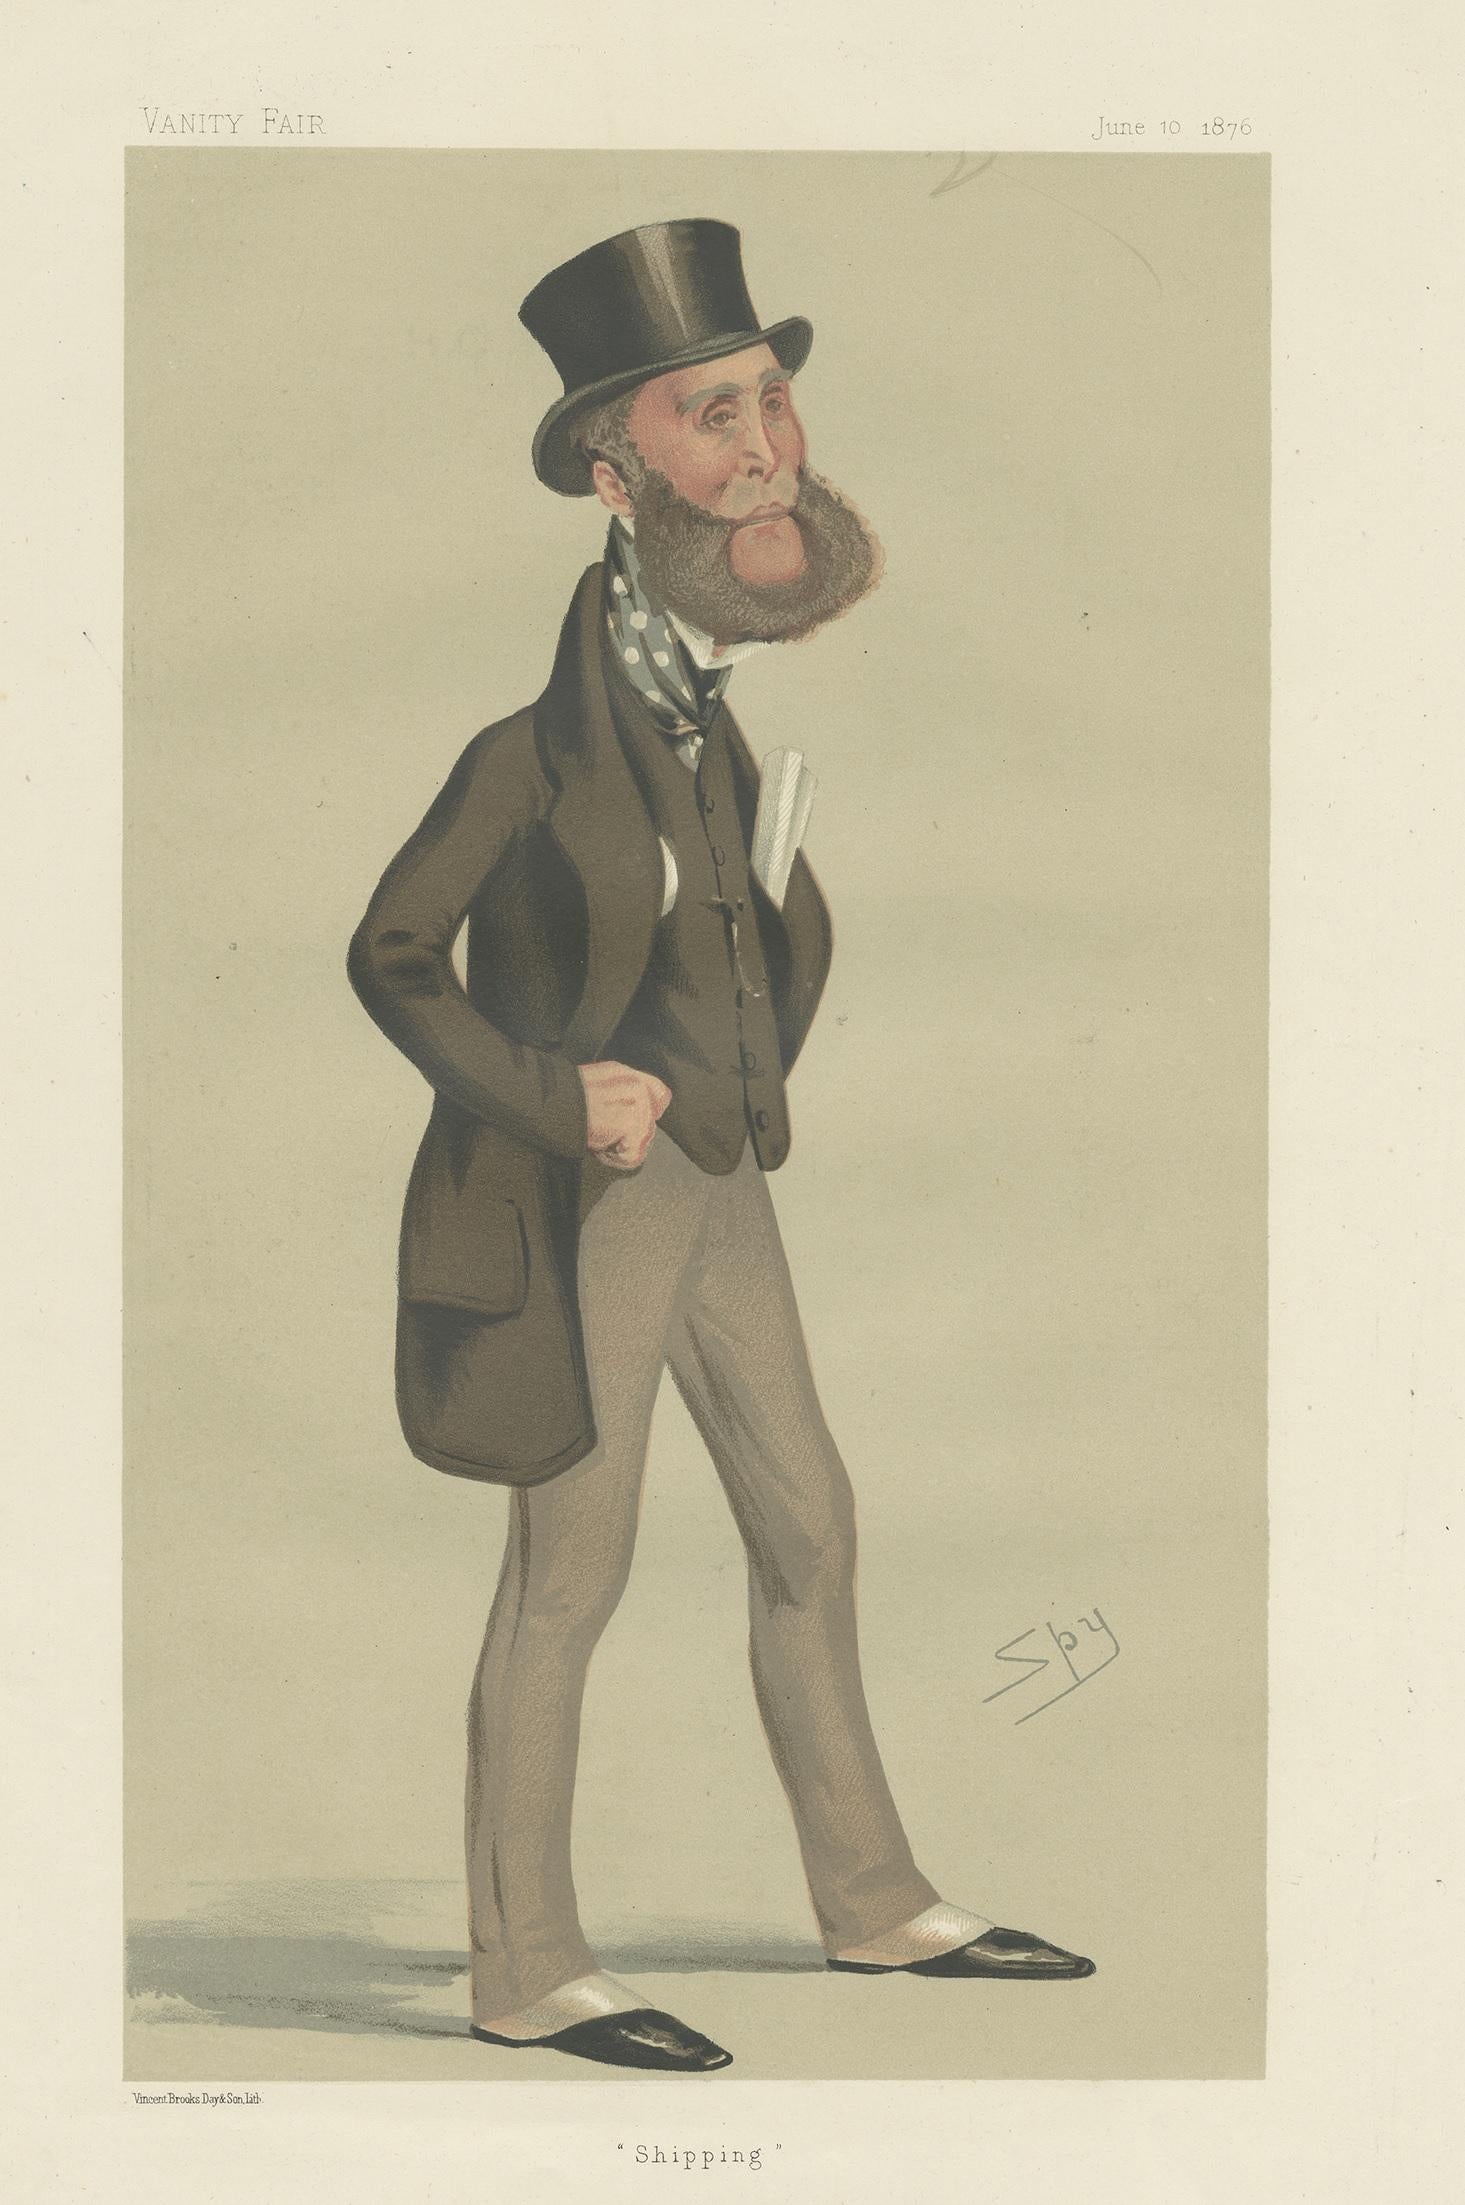 Antique print titled 'shipping'. Henry George Liddell, 2nd Earl of Ravensworth (8 October 1821–22 July 1903), styled Lord Eslington between 1874 and 1878, was a British Conservative politician. This caricature print originates from the Vanity Fair